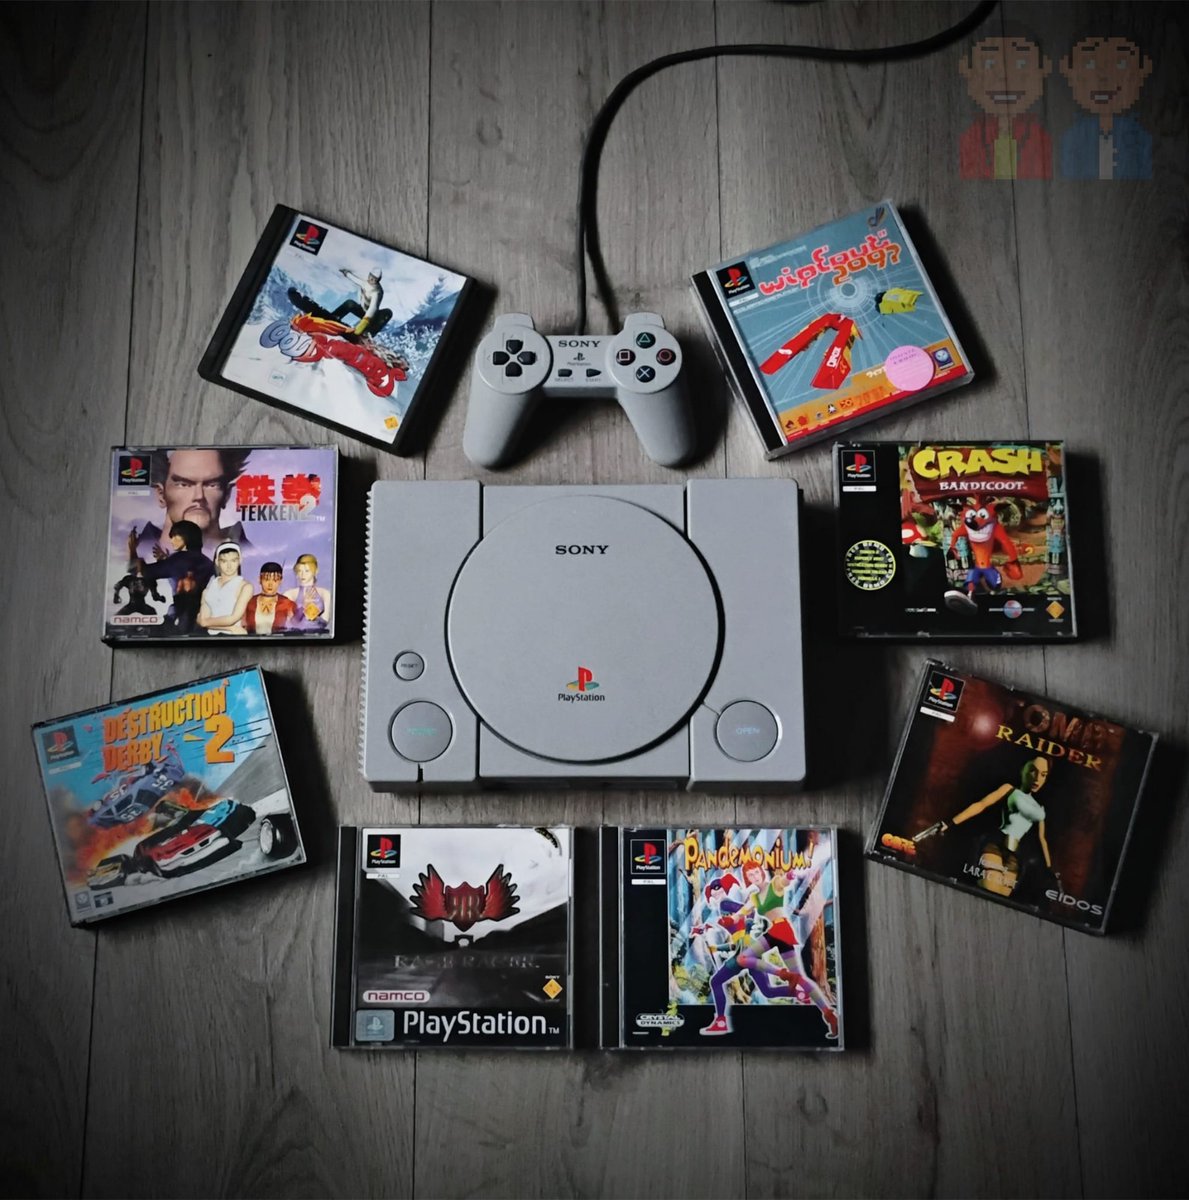 '95 had some standout titles, but '96 was the year the #PlayStation phenomenon began in full swing, with following years only growing from strength to strength. What was your favourite PS release of 1996? #GamersUnite #RETROGAMING #retrogamer #retrogames #PS1 #Retro